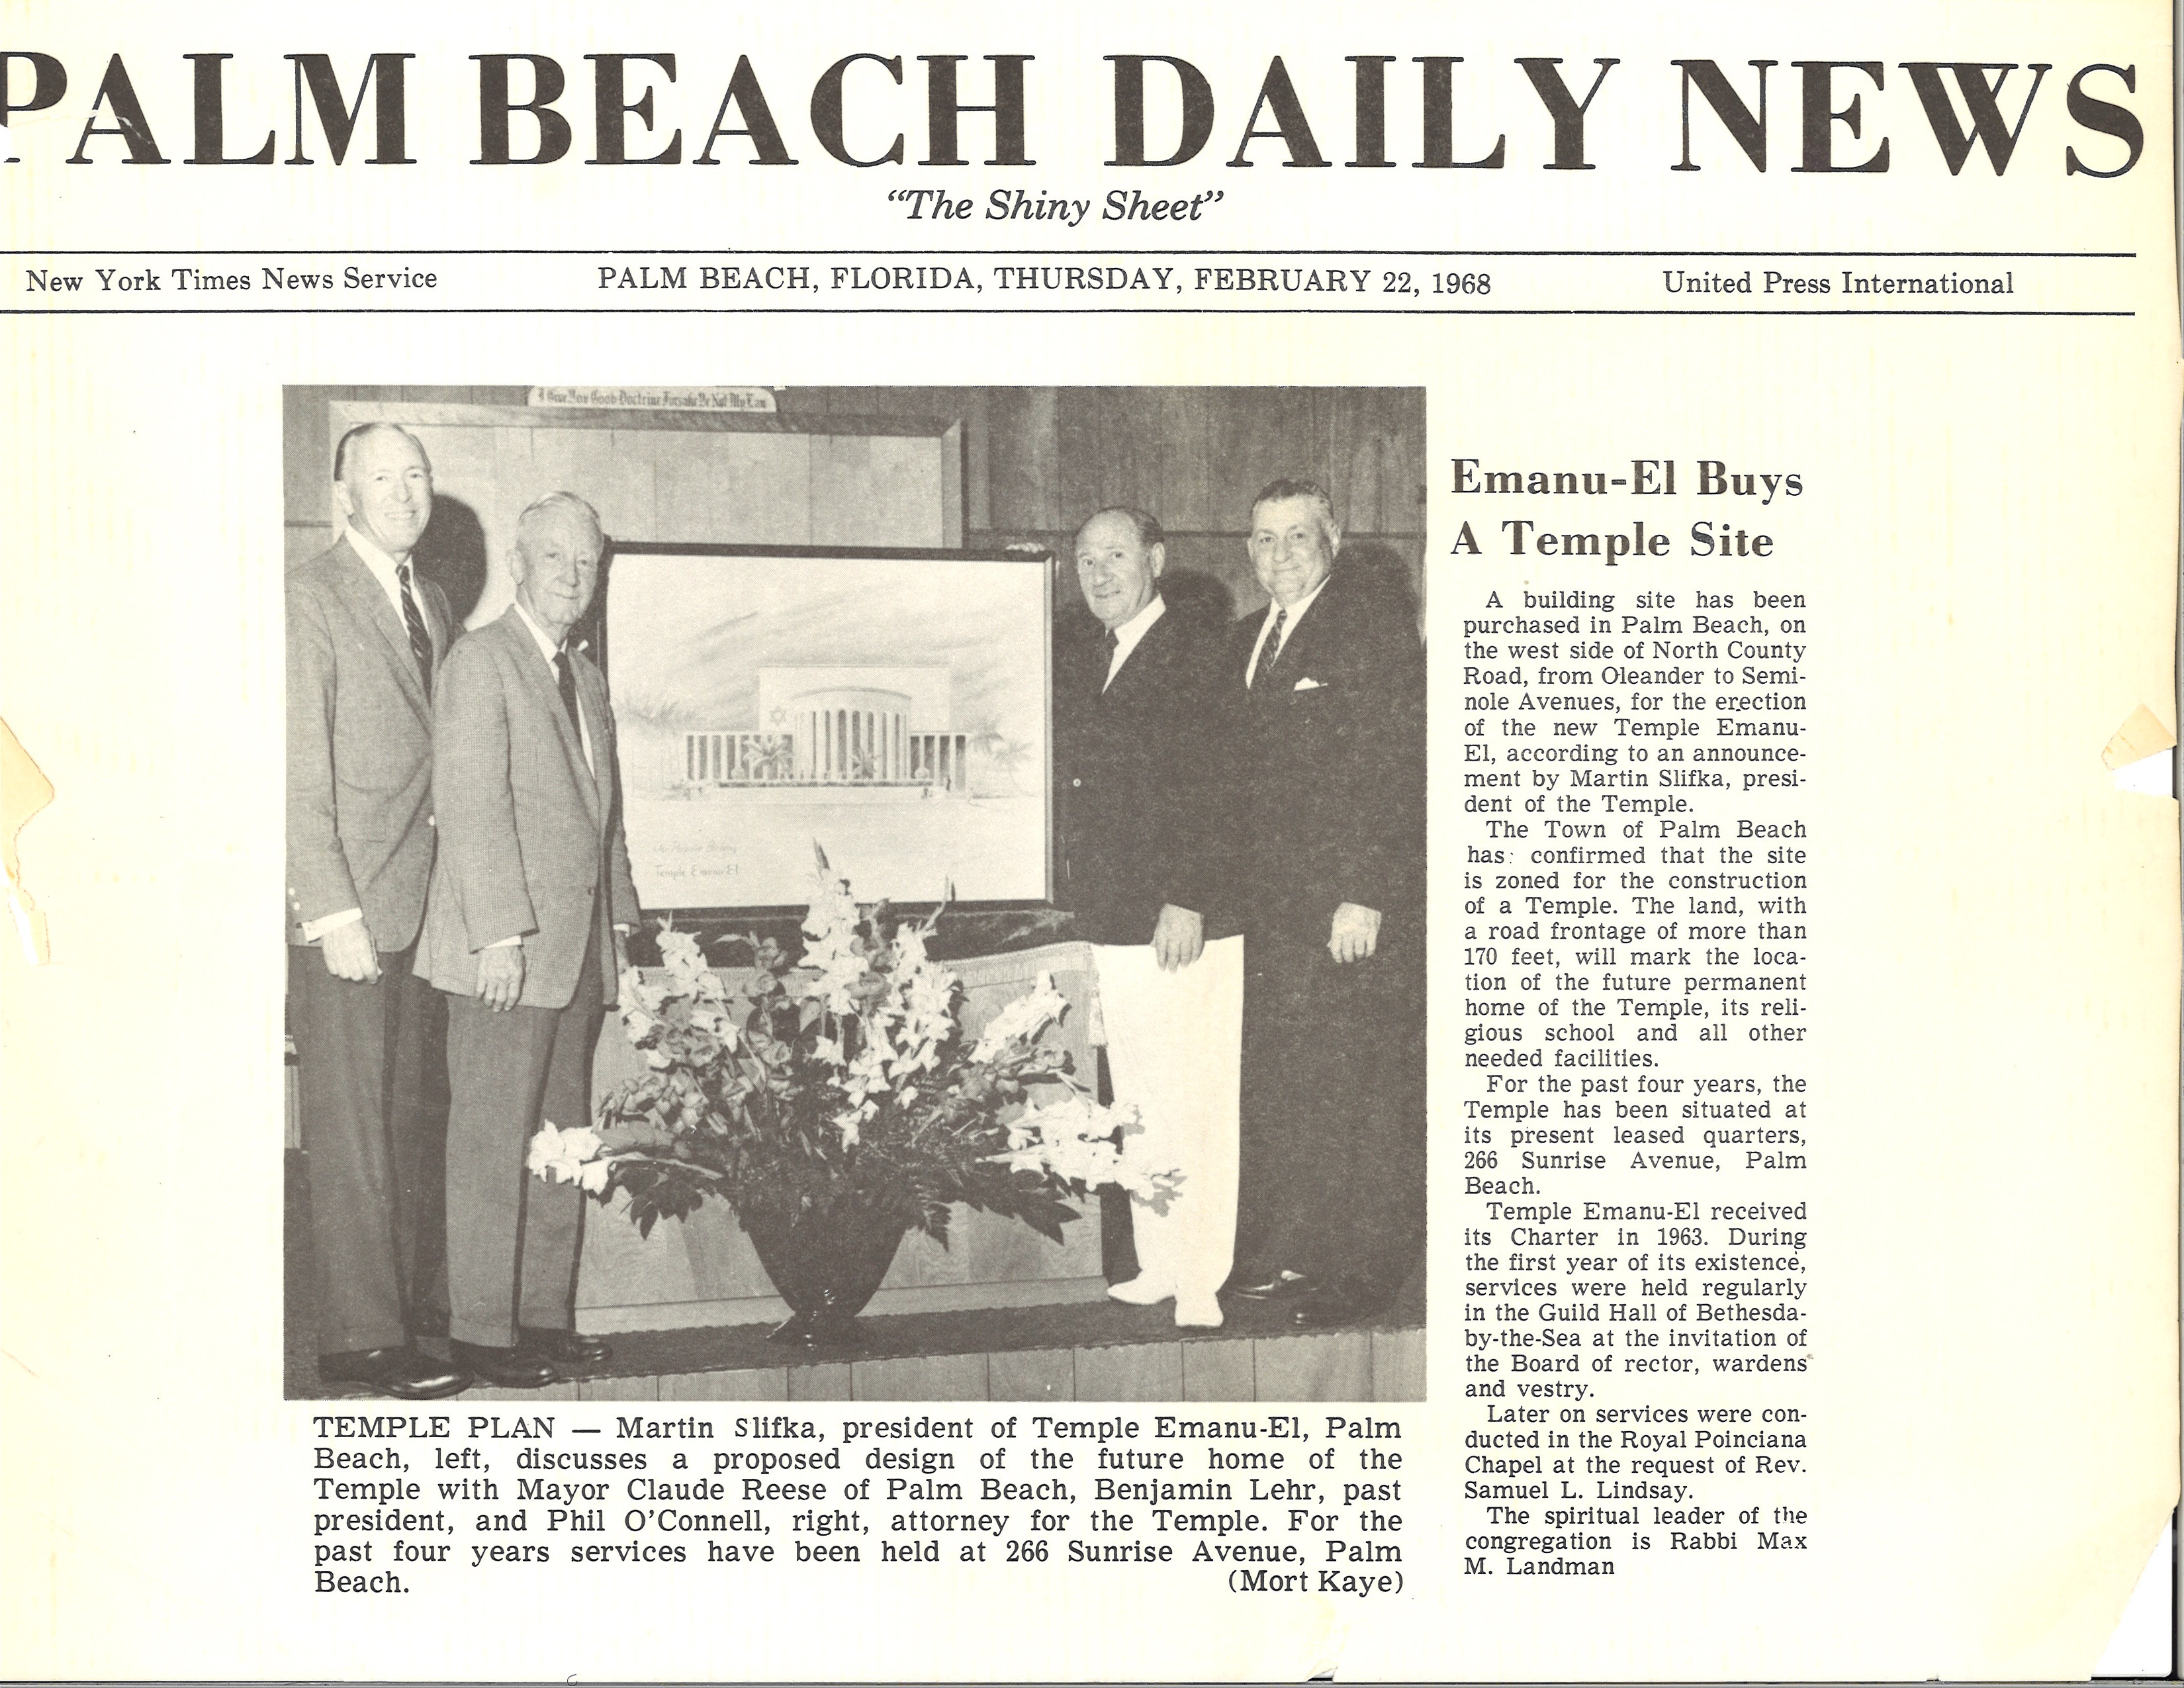 Palm Beach From The Past To Present